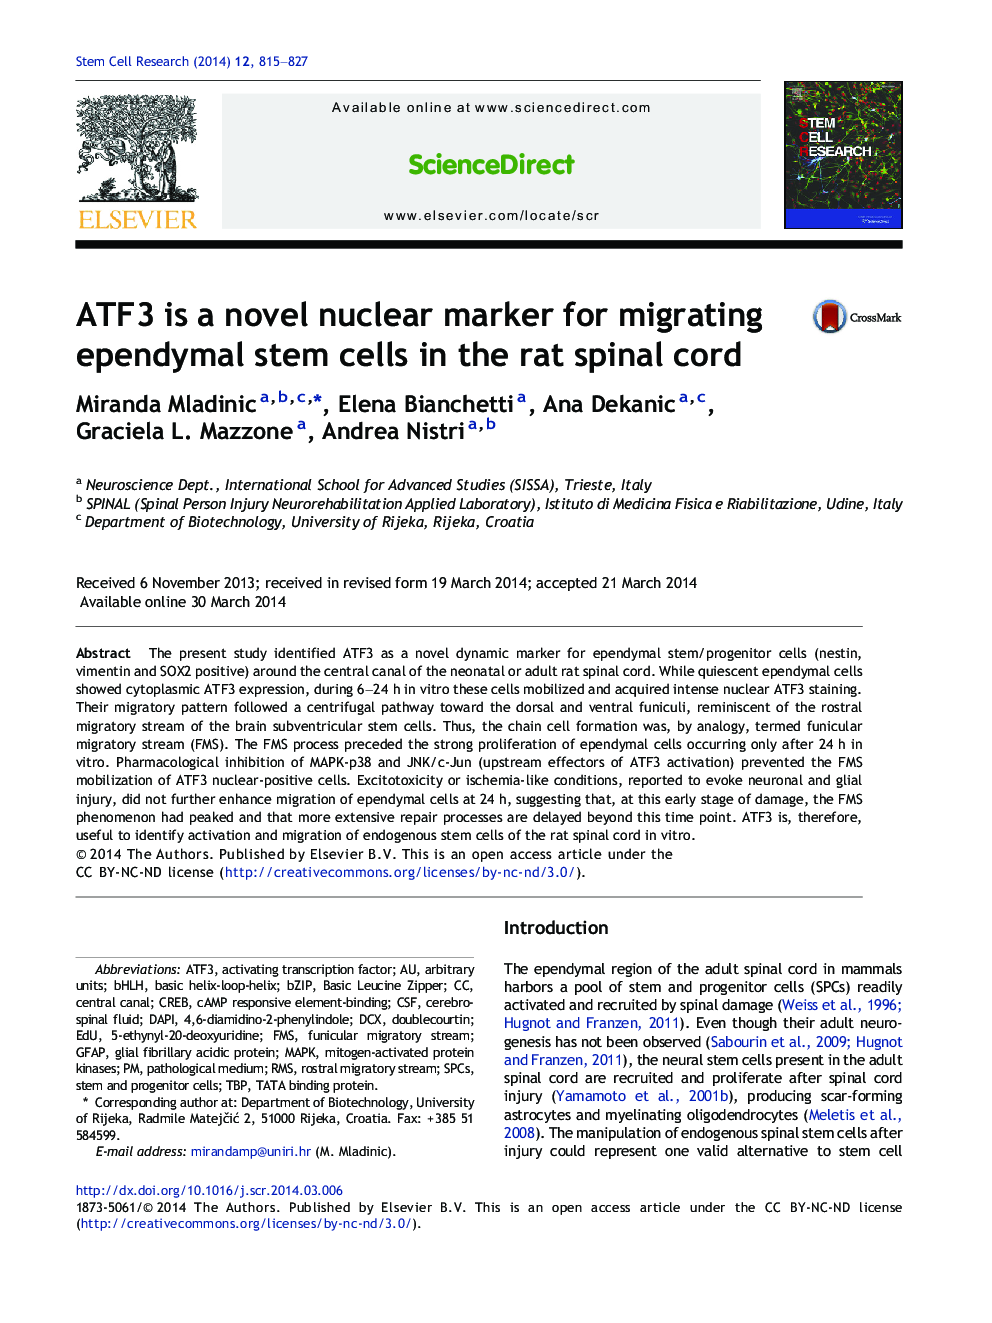 ATF3 is a novel nuclear marker for migrating ependymal stem cells in the rat spinal cord